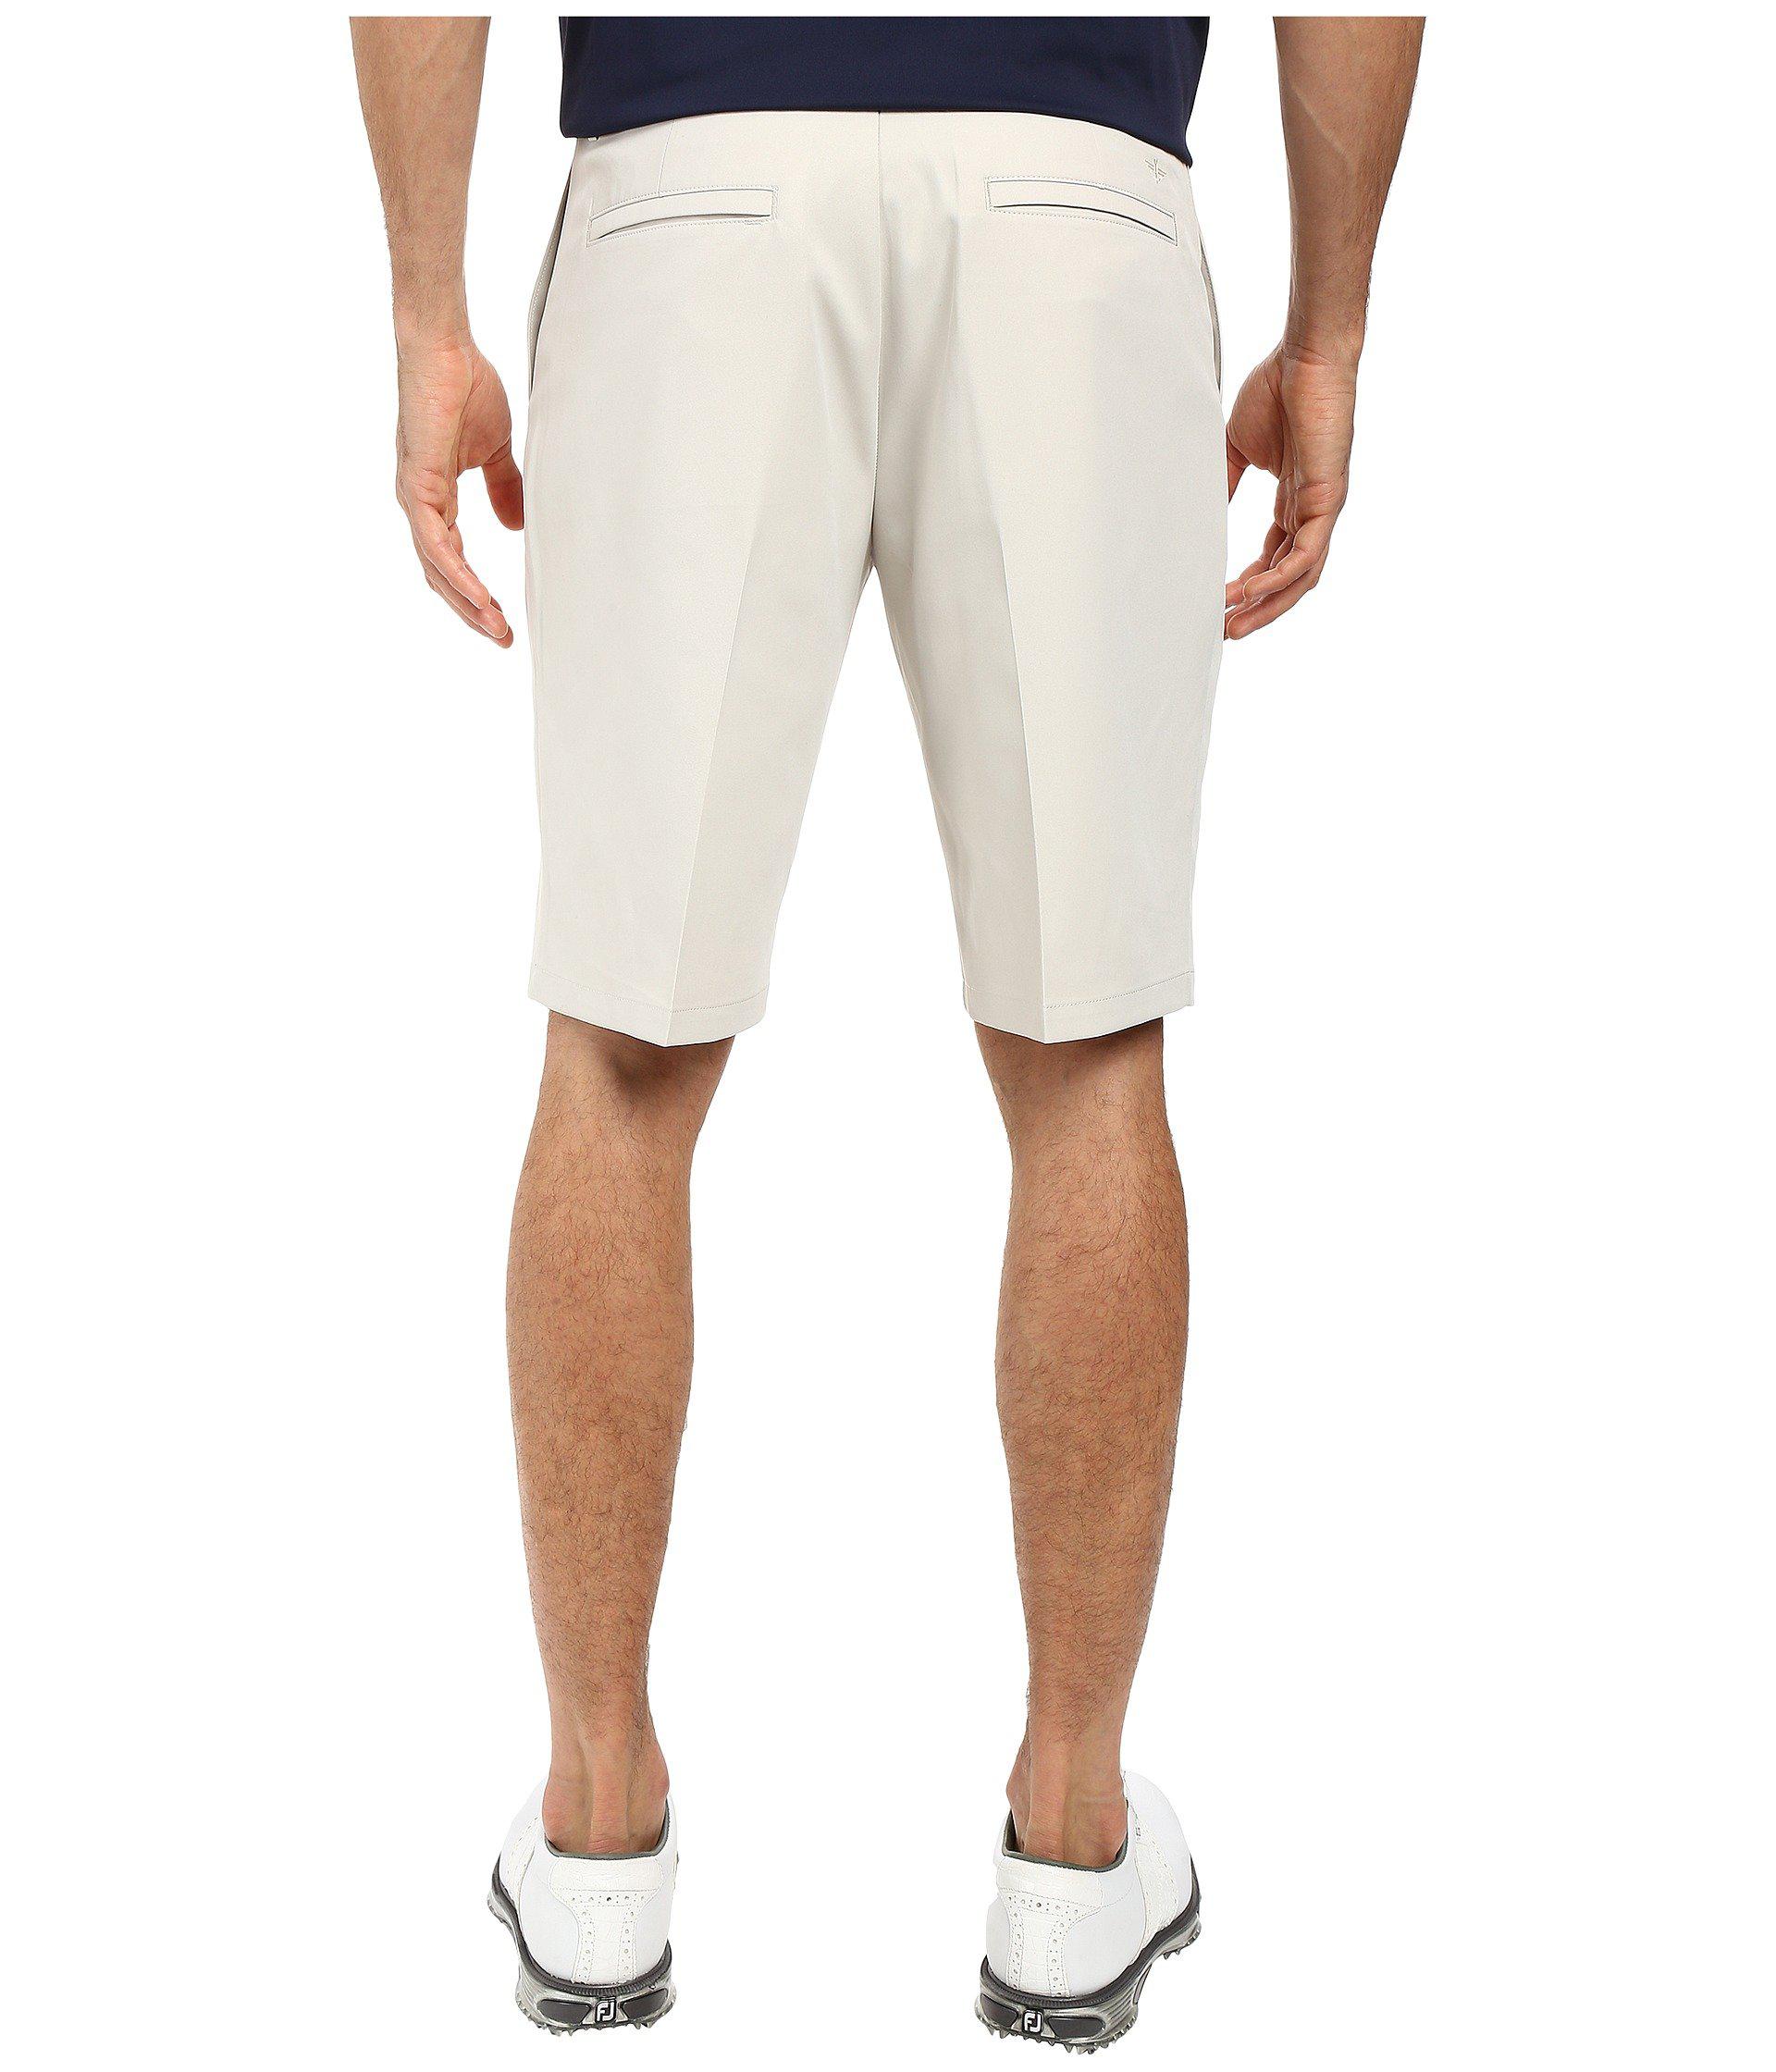 Lyst - Dockers Classic Fit Flat Front Golf Shorts in Black for Men